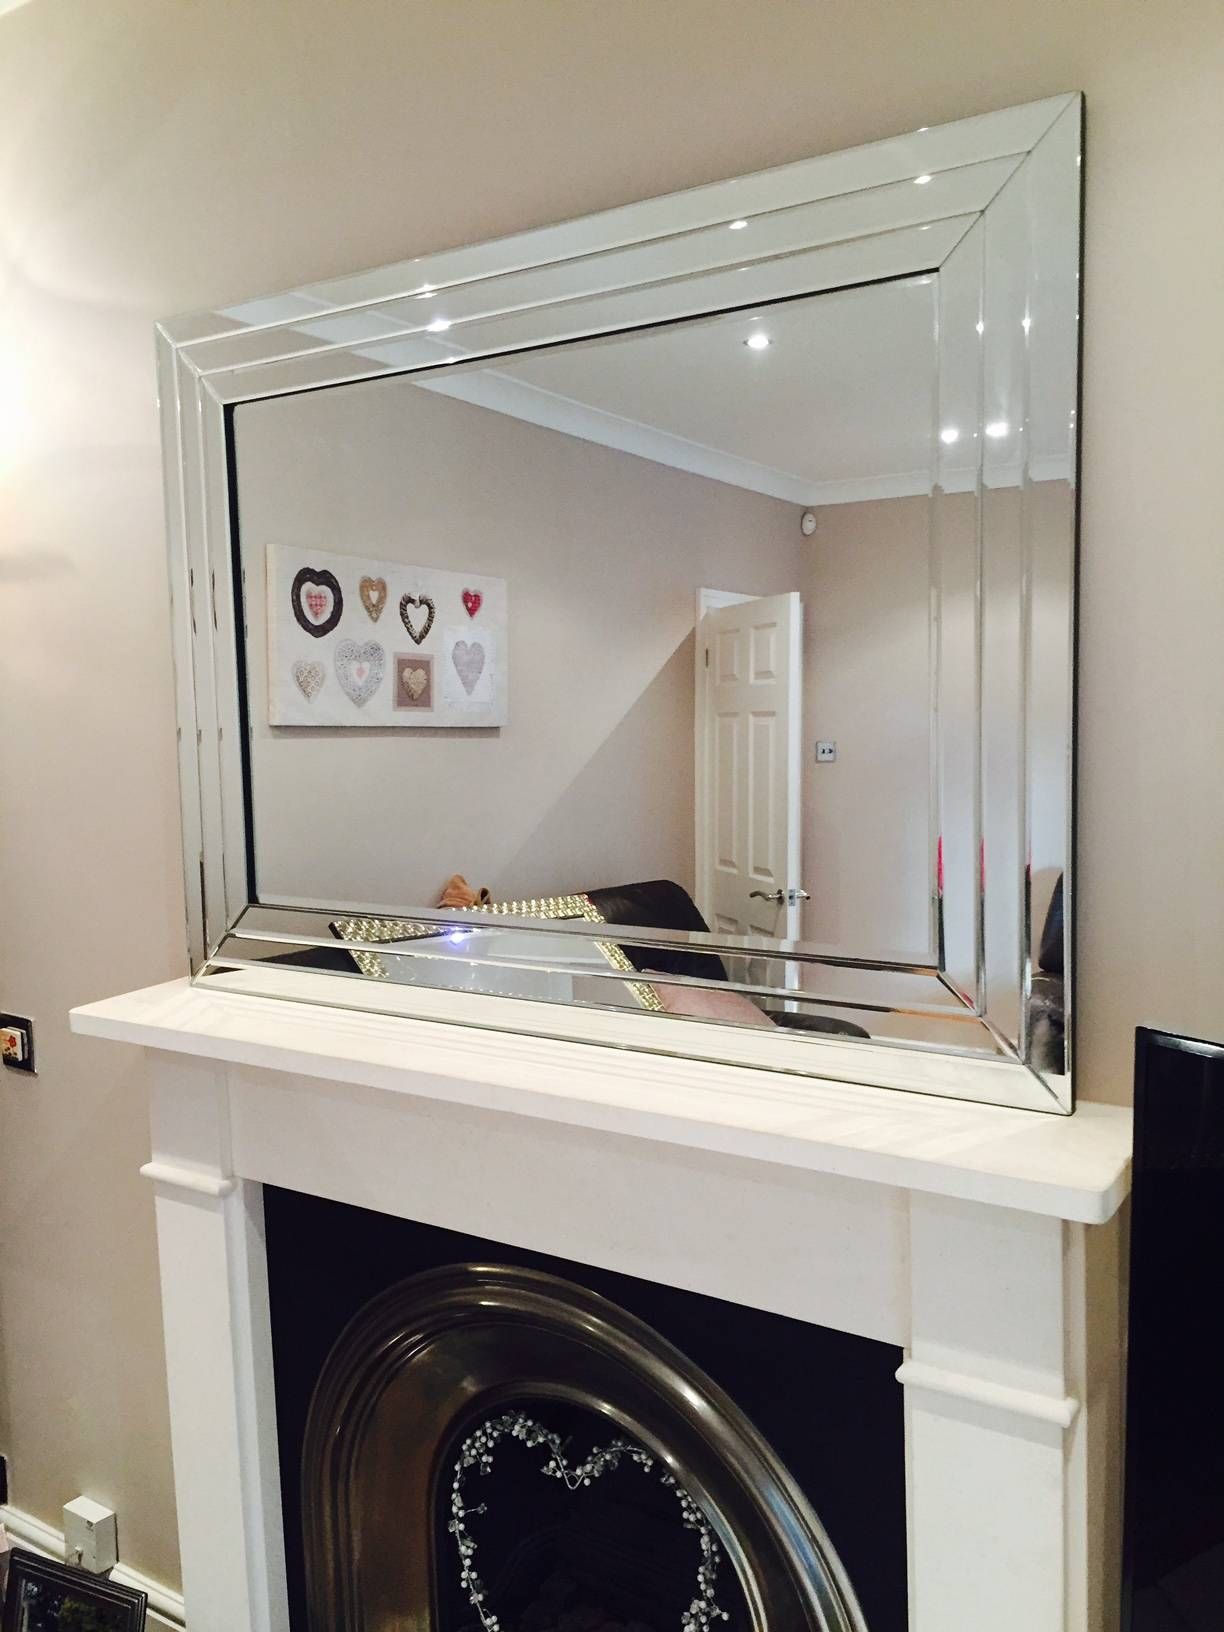 Prs Group Uk | Large Venetian Bevelled Wall Mirror 117cm X 87cm Throughout Venetian Bevelled Mirrors (View 17 of 25)